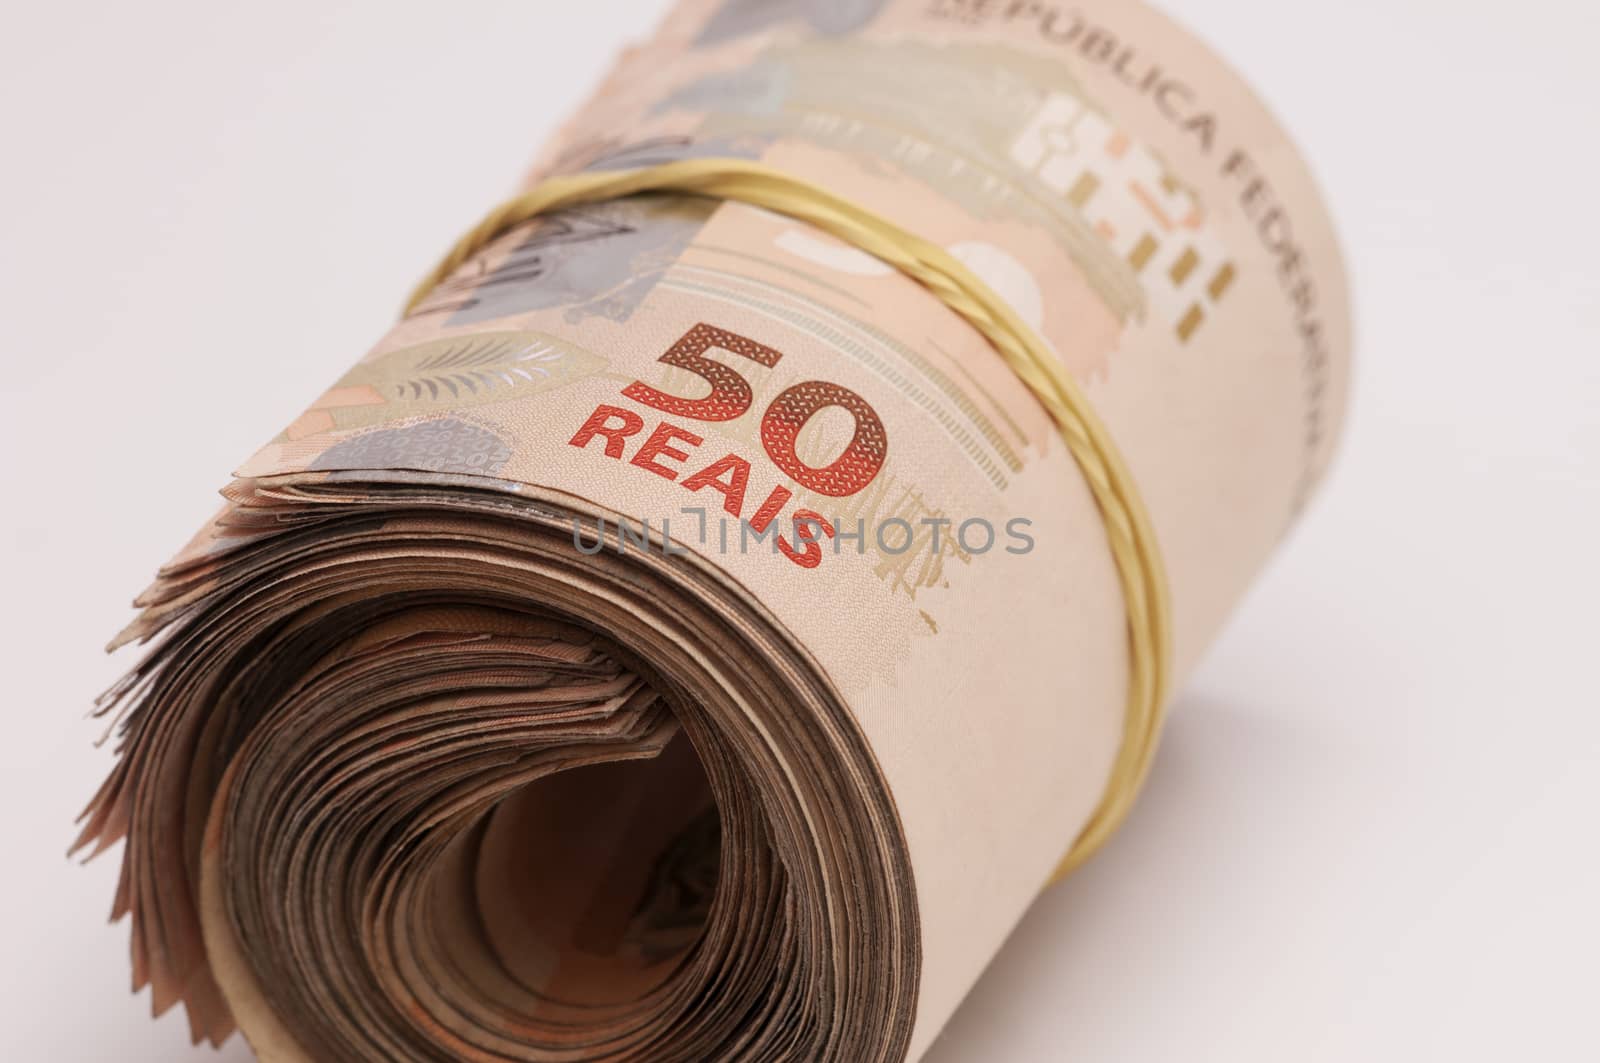 A few bills of brazilian currency (real) on white background